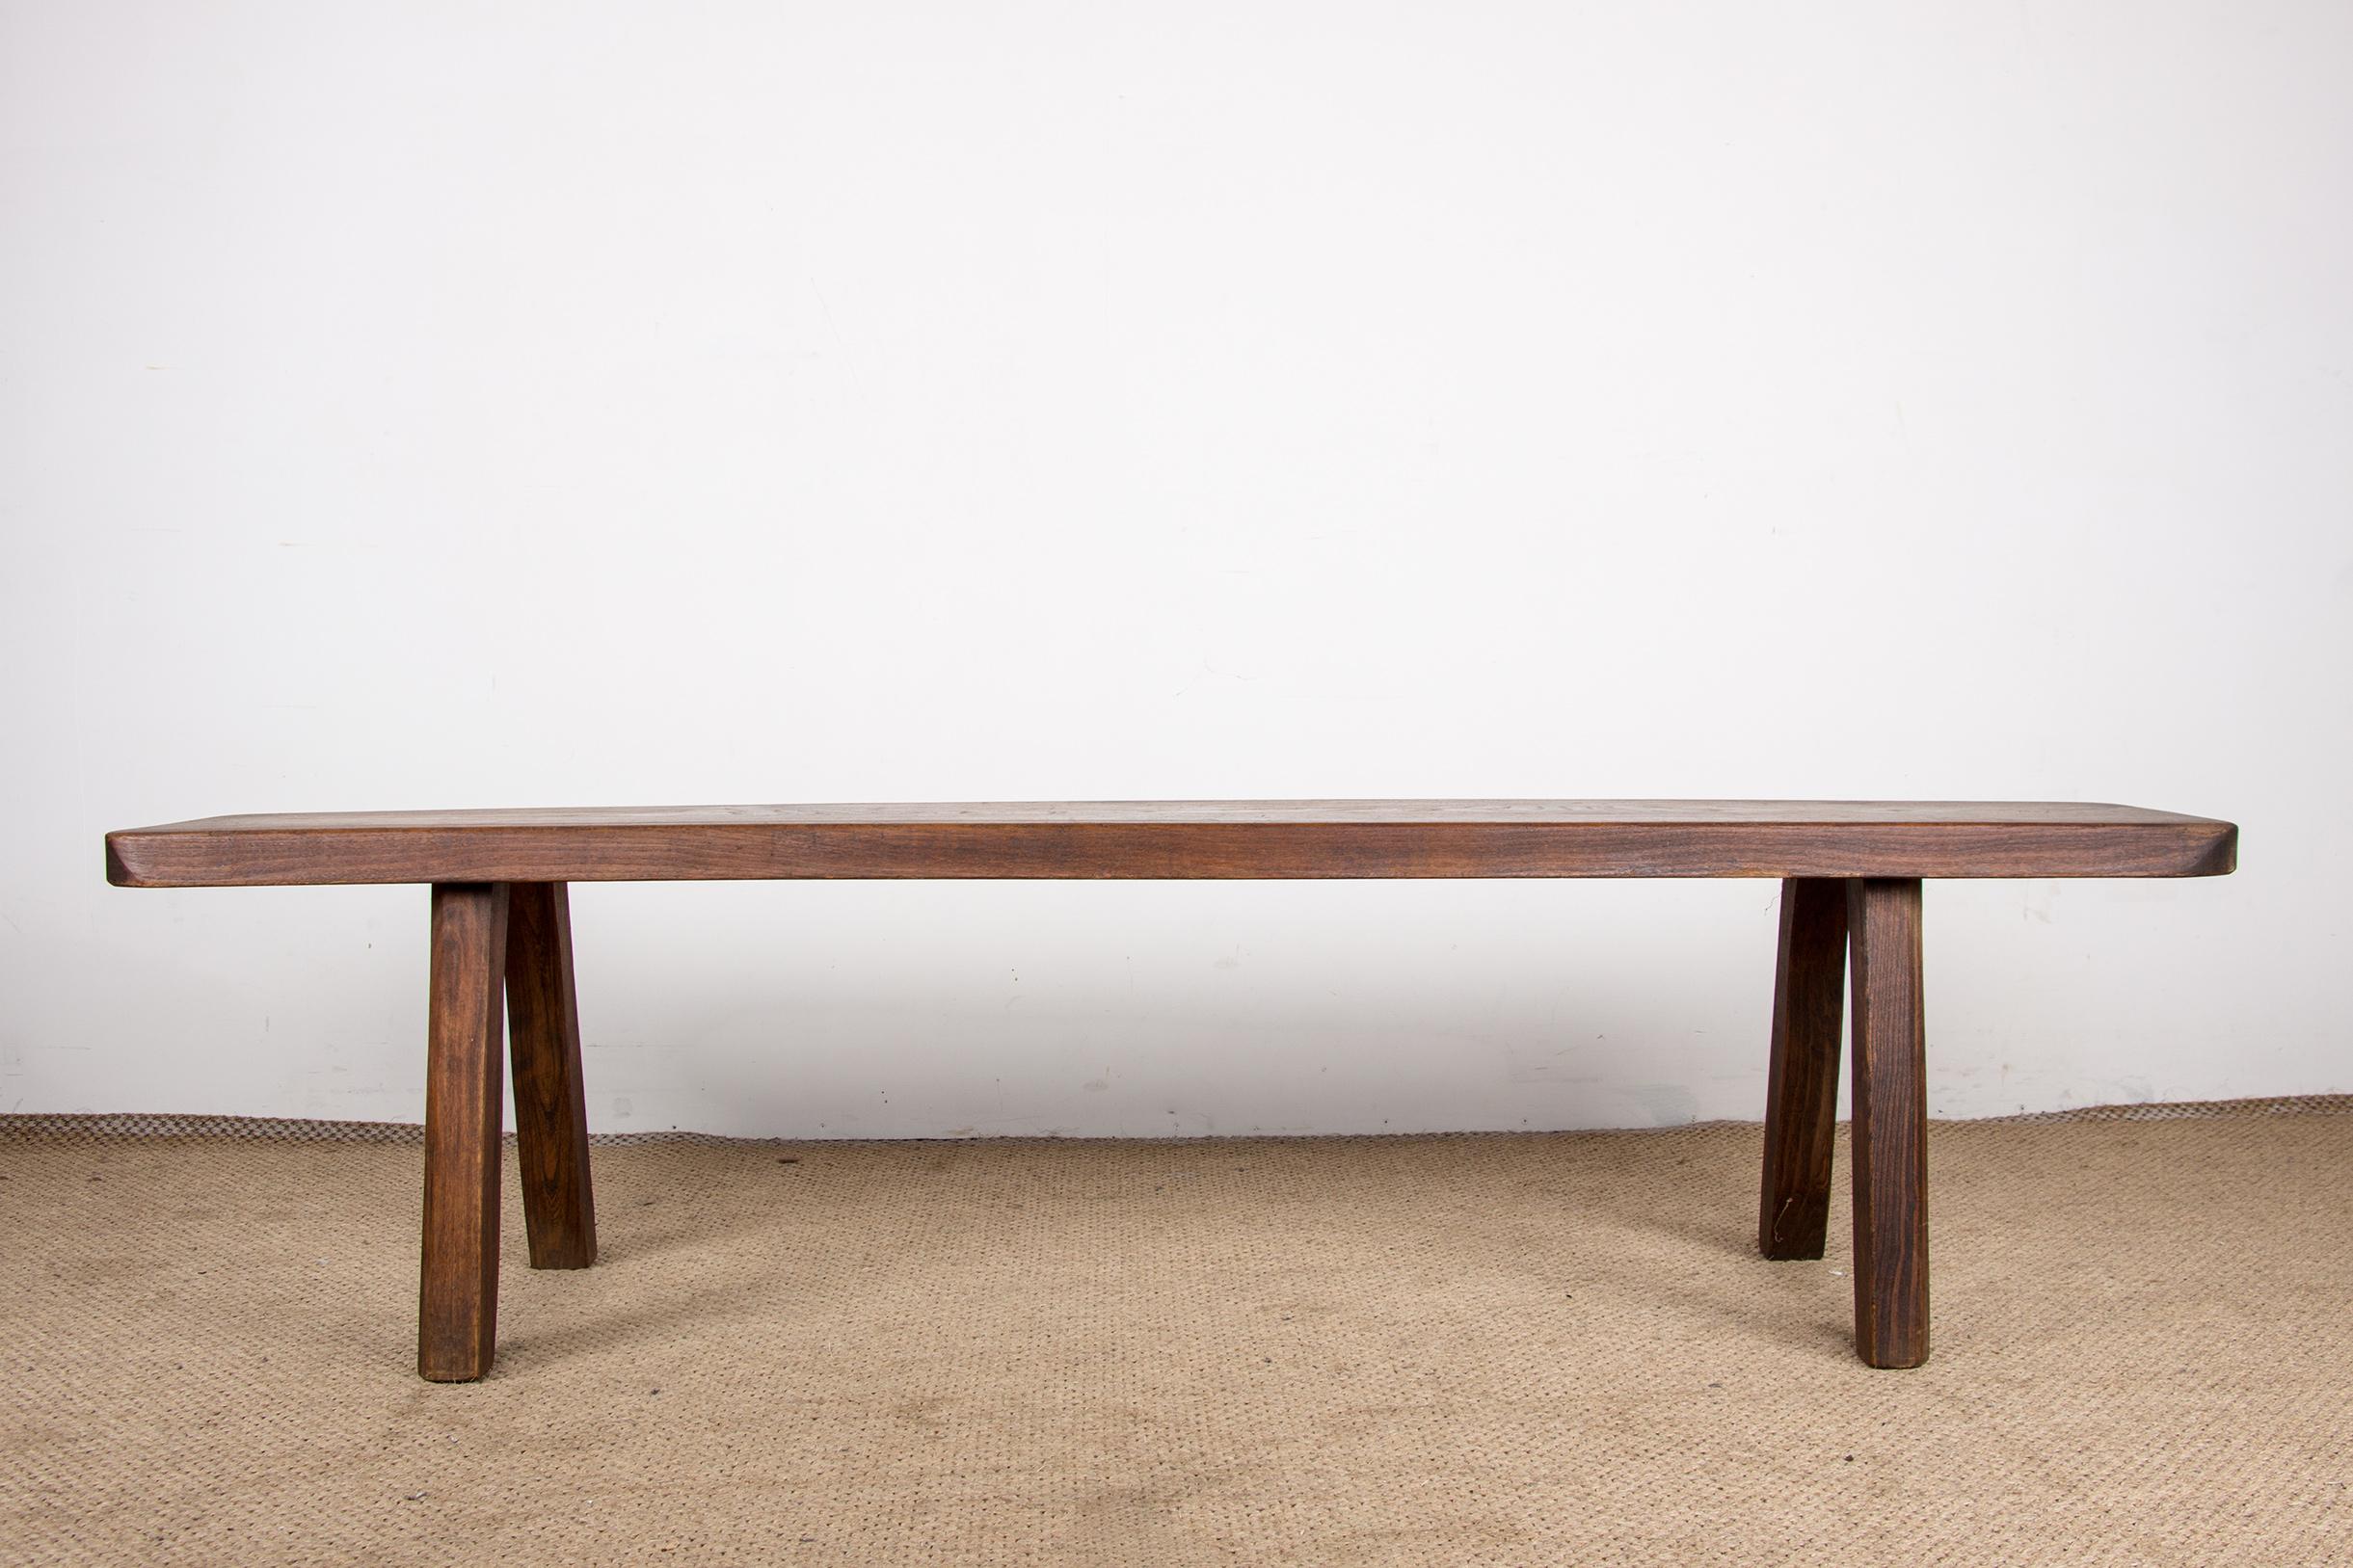 Mid-20th Century Pair of Scandinavian benches in Solid Elm by Olavi Hanninen 1960.